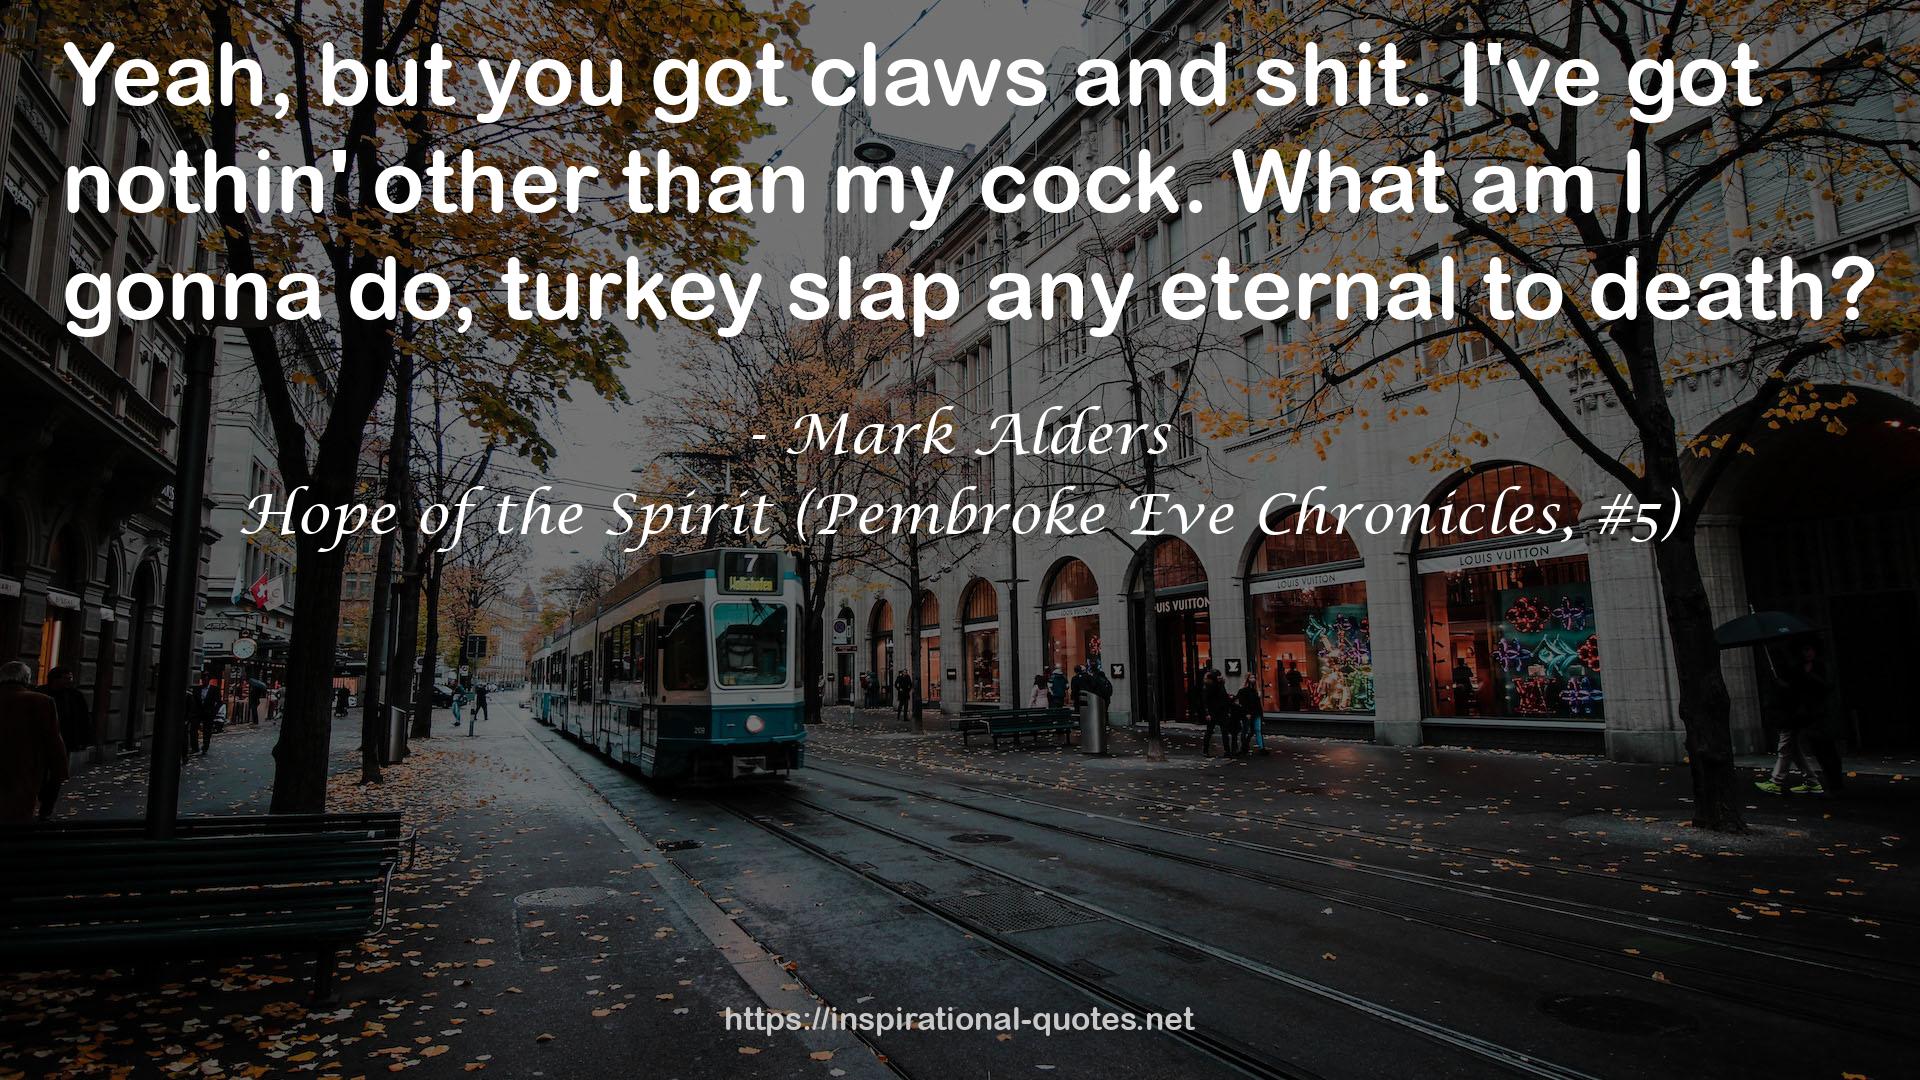 Hope of the Spirit (Pembroke Eve Chronicles, #5) QUOTES